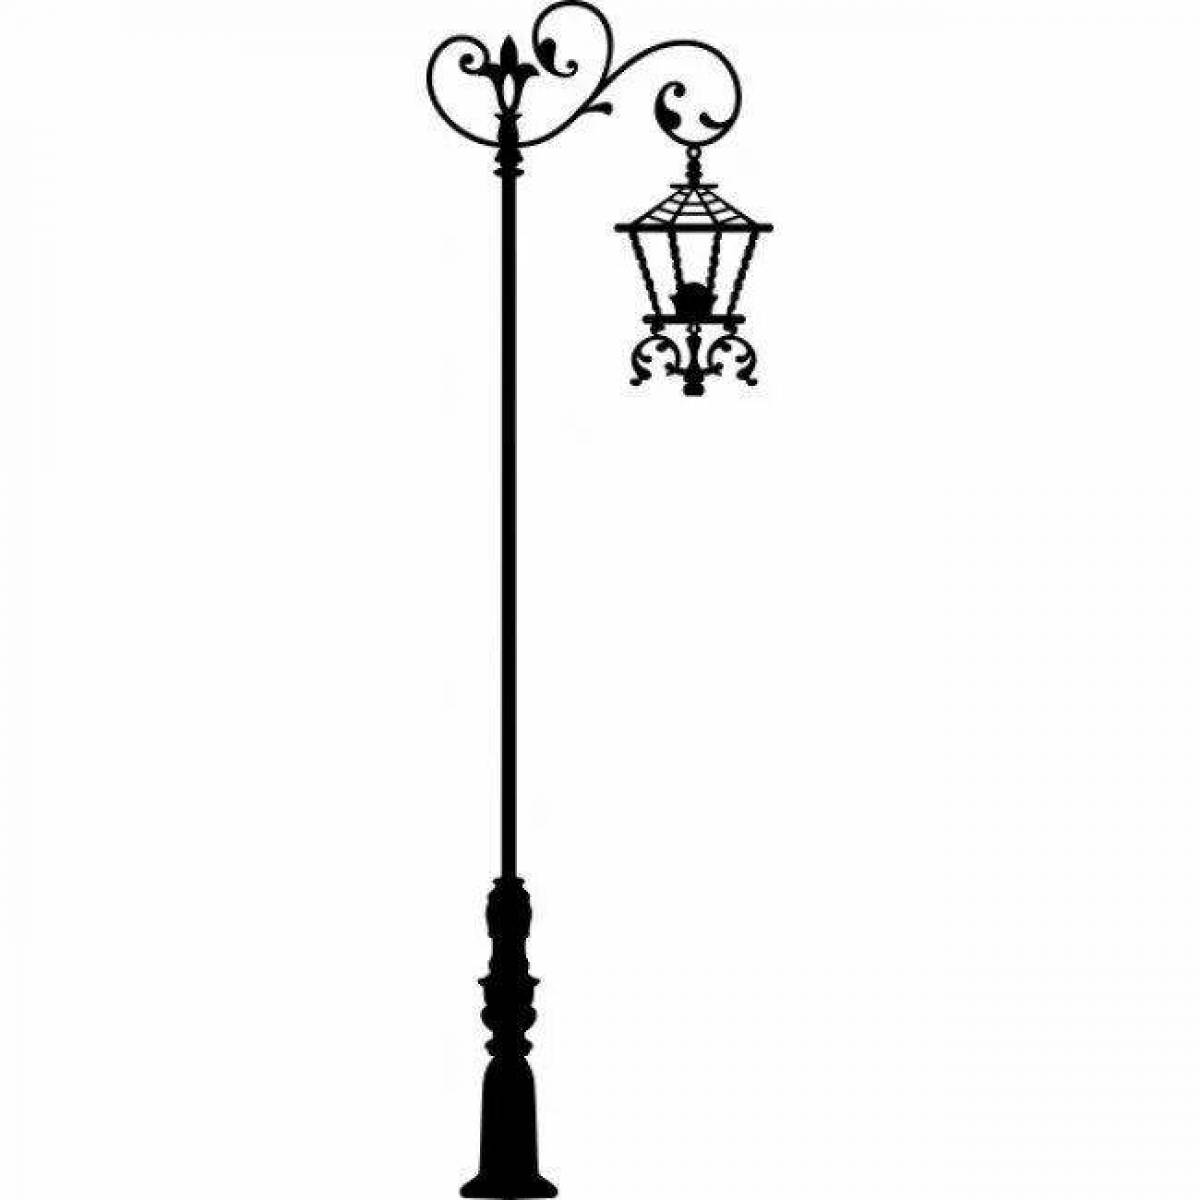 Coloring page unusual street lamp